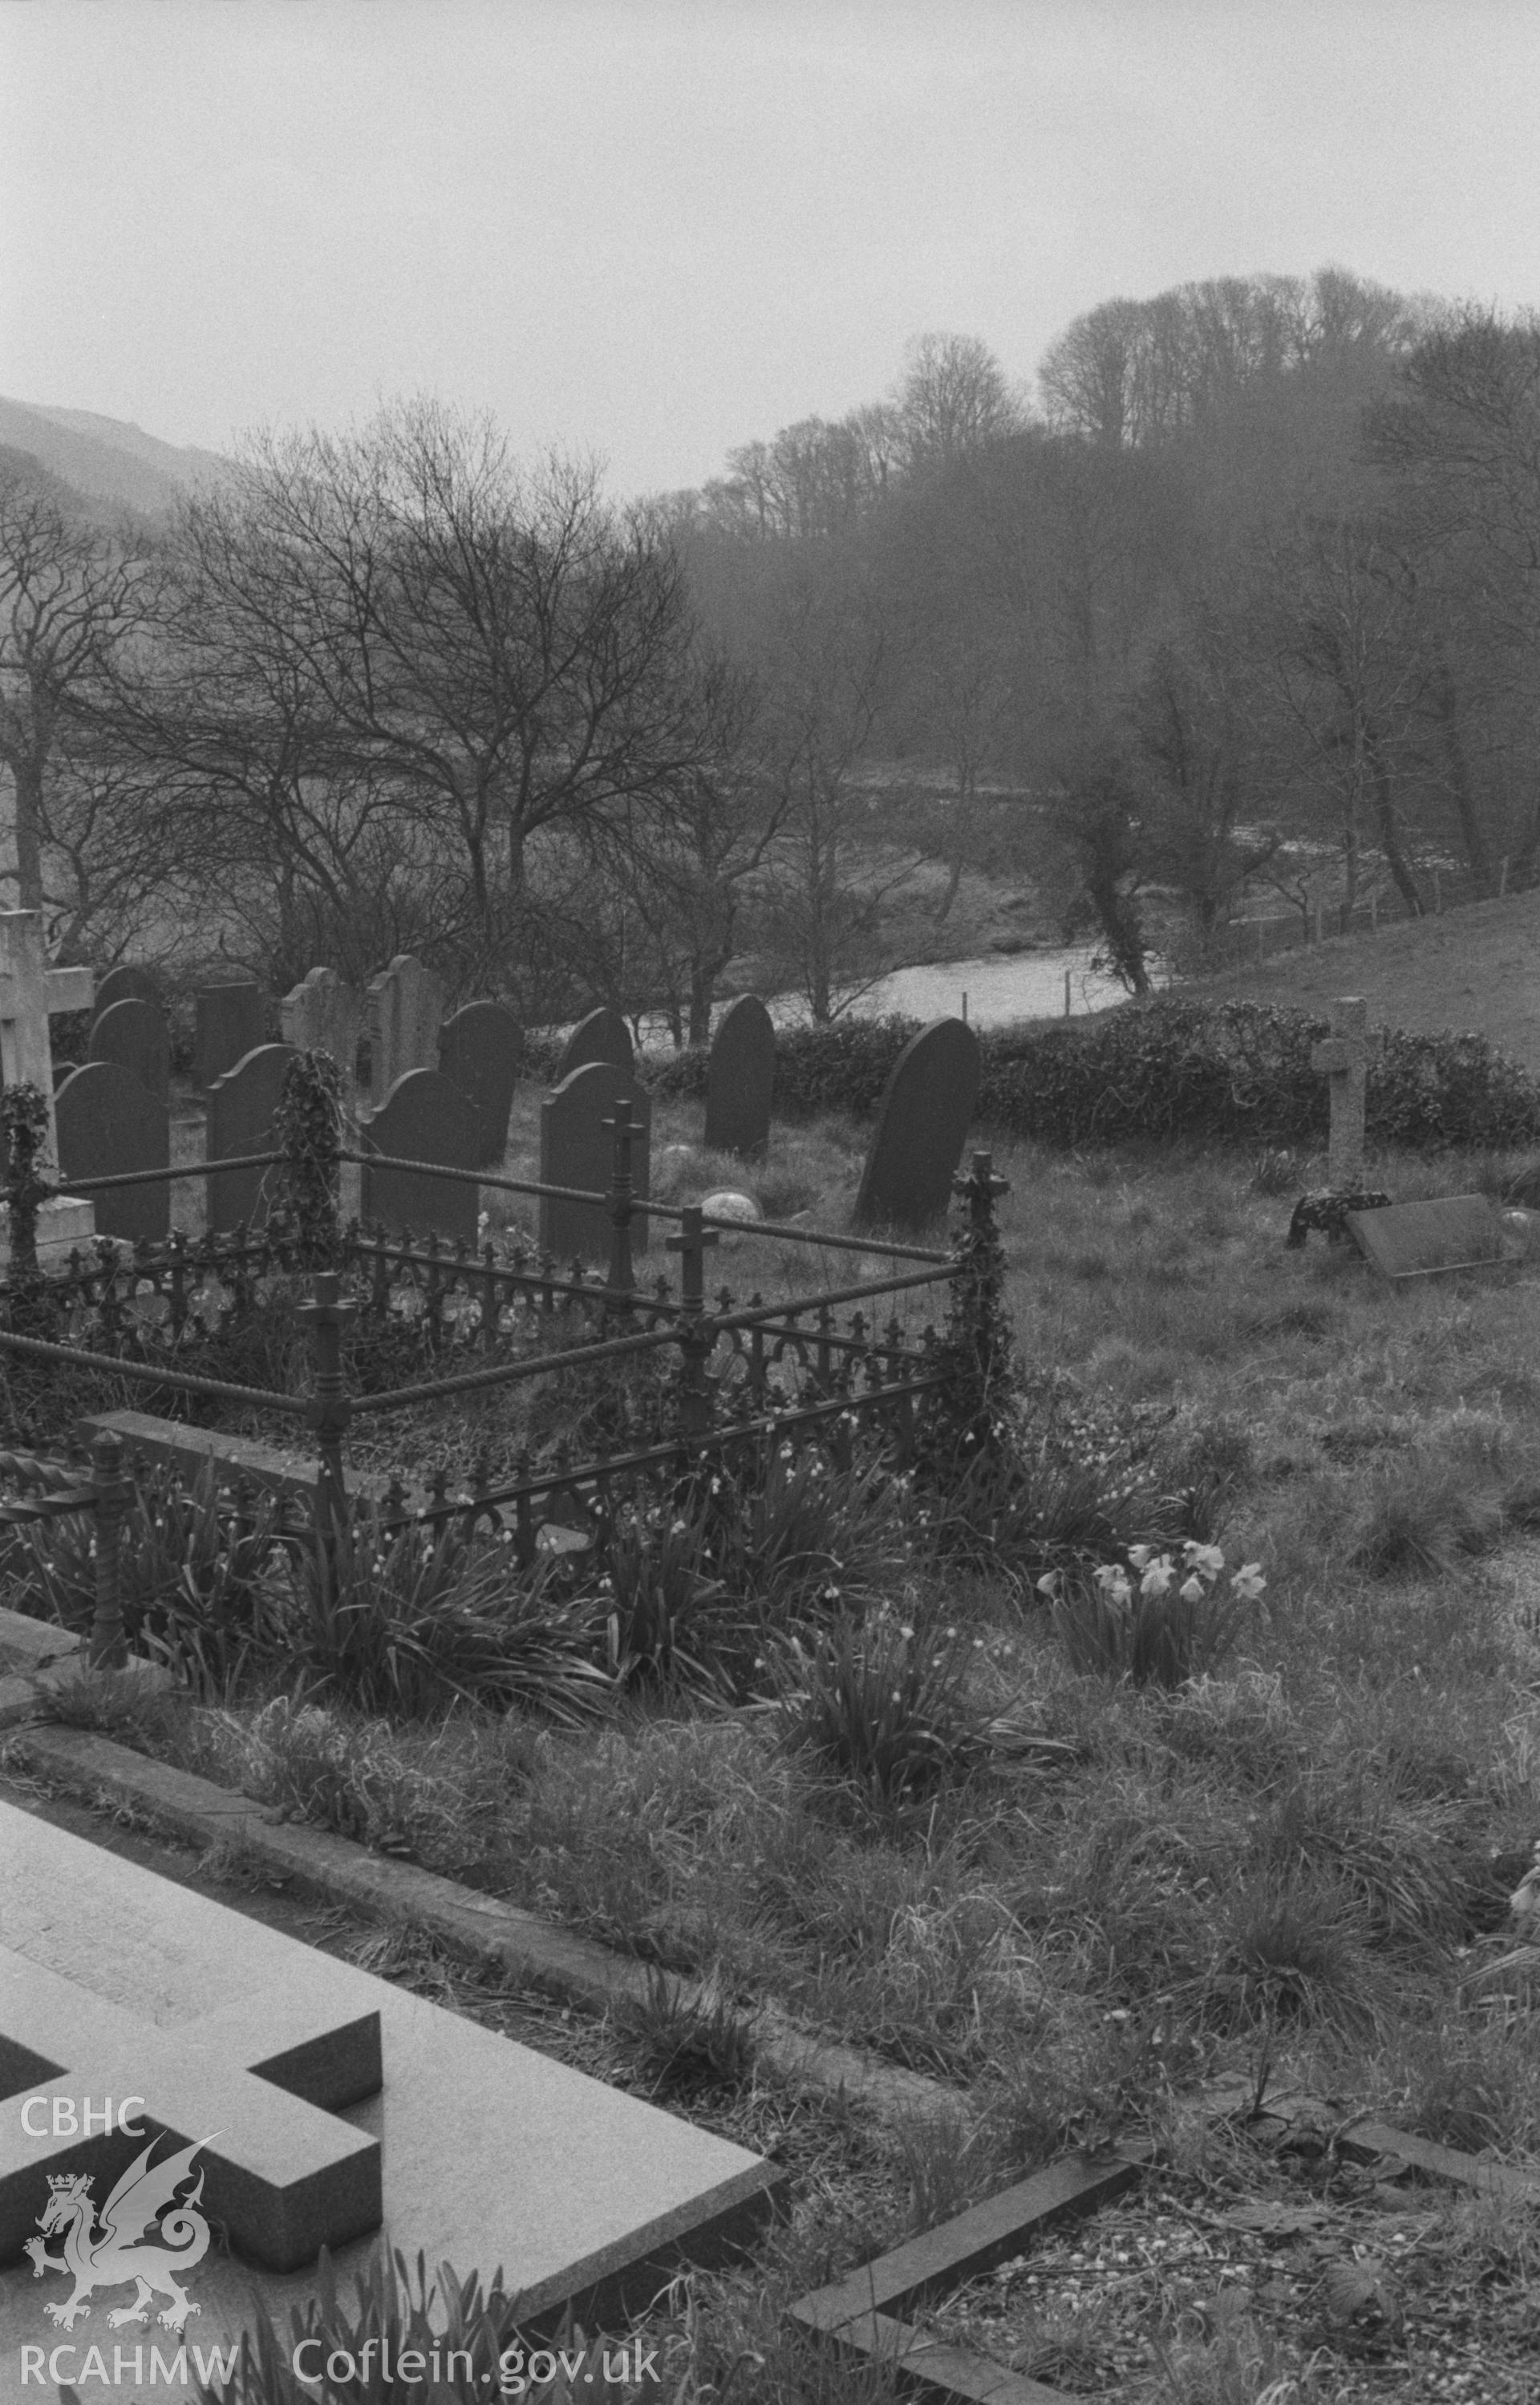 Black and White photograph showing leucojum aestivum (summer snowflake) in graveyard at Llanchaiarn. Photographed by Arthur Chater in April 1962 from Grid Reference SN 585 786, looking east.